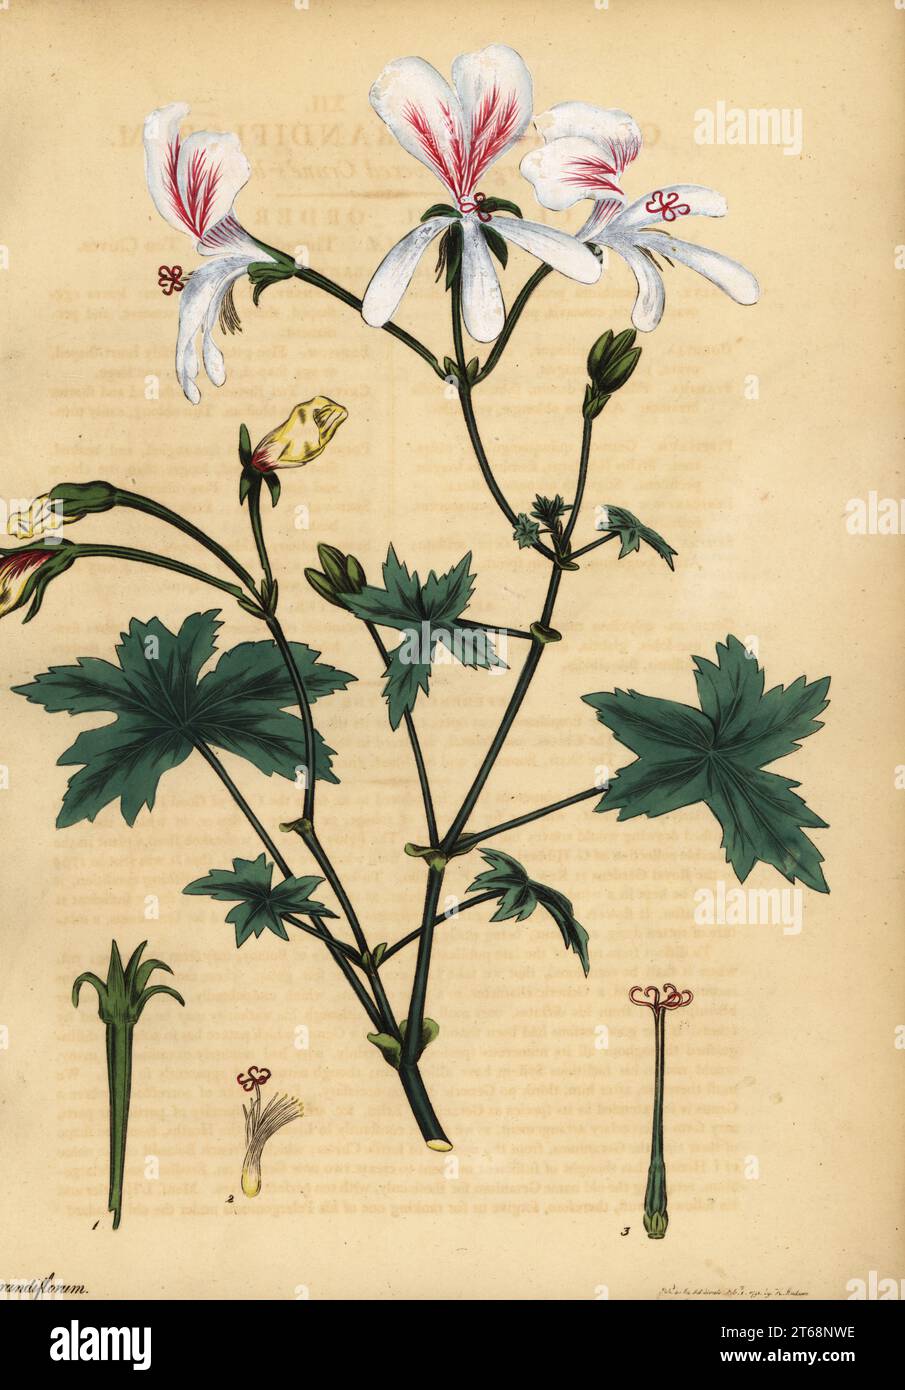 Grielum grandiflorum. Largest flowered crane's-bill, Geranium grandiflorum. Copperplate engraving drawn, engraved and hand-coloured by Henry Andrews from his Botanical Register, Volume 1, published in London, 1799. Stock Photo